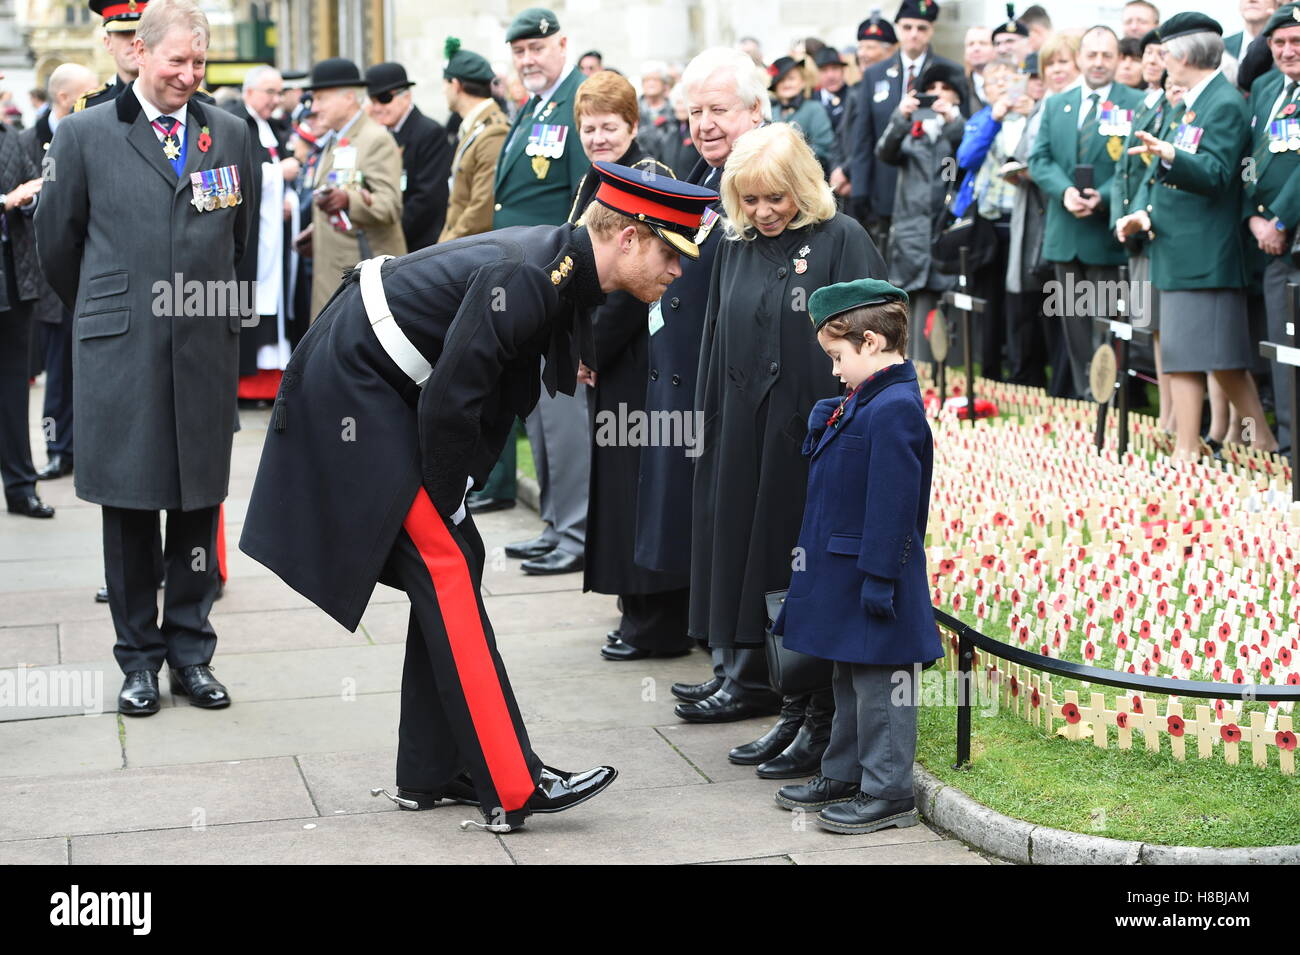 Prince Harry greets a child at London's Westminster Abbey where he and the Duke of Edinburgh visited the Field of Remembrance, observed a two minutes' silence and met veterans from past and more recent conflicts. Stock Photo